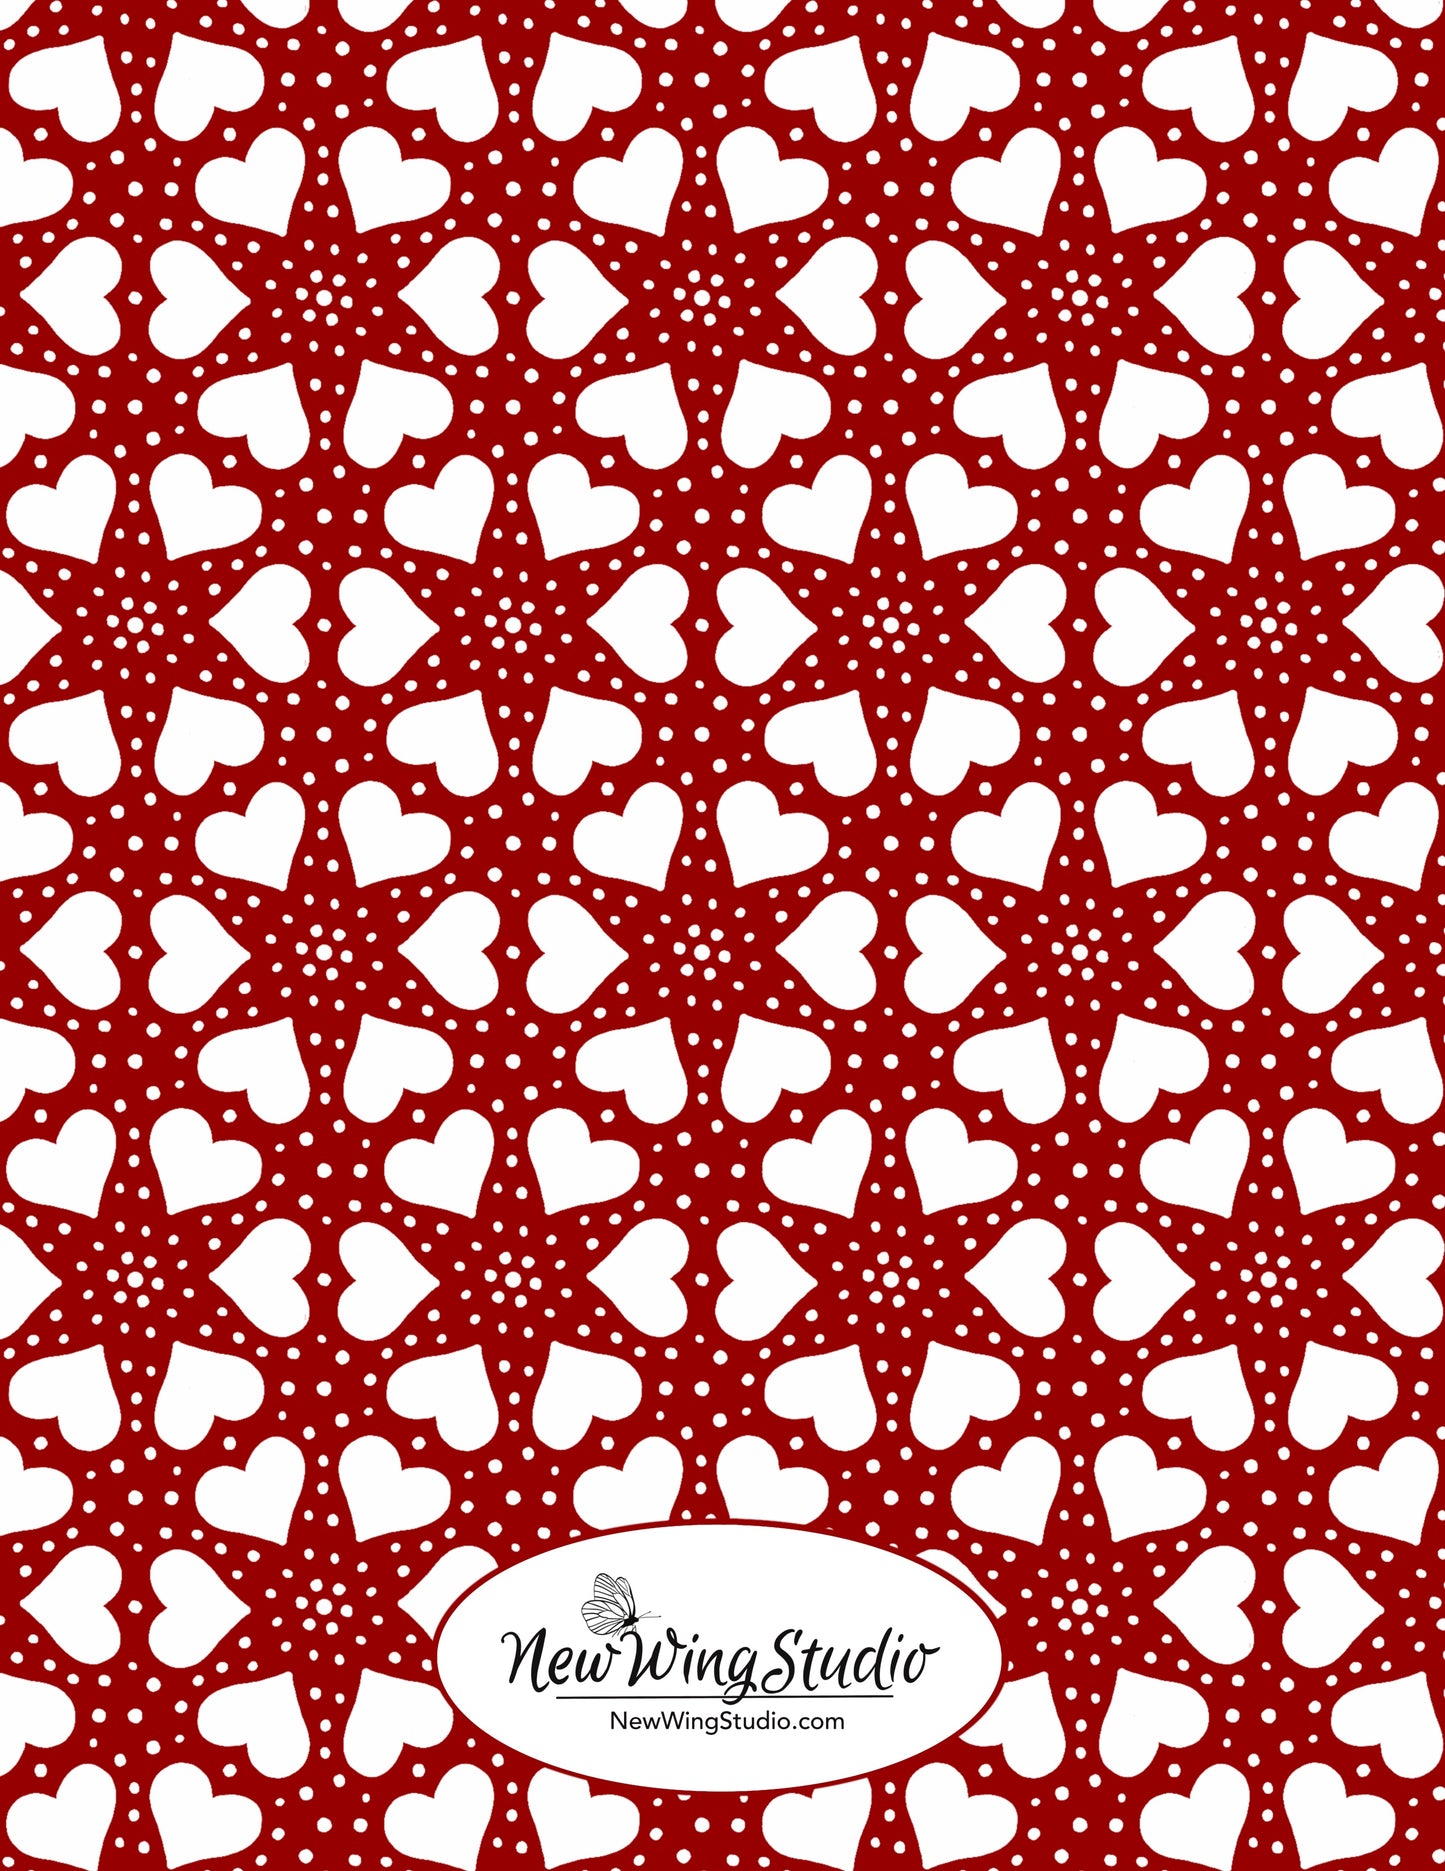 The back of our best selling "I Love You From the Bottom of My Heart" greeting card features an adorable pattern of hearts and dots.  The front of the card includes an elegant hand-drawn heart with the text "I love u" forming the "V" of the bottom of the heart.  The image is displayed on a vivid red background and the words "from the bottom of my heart" are printed in messy handwriting below. All of our original artwork is created by Jennifer Knight.  Newwingstudio.com